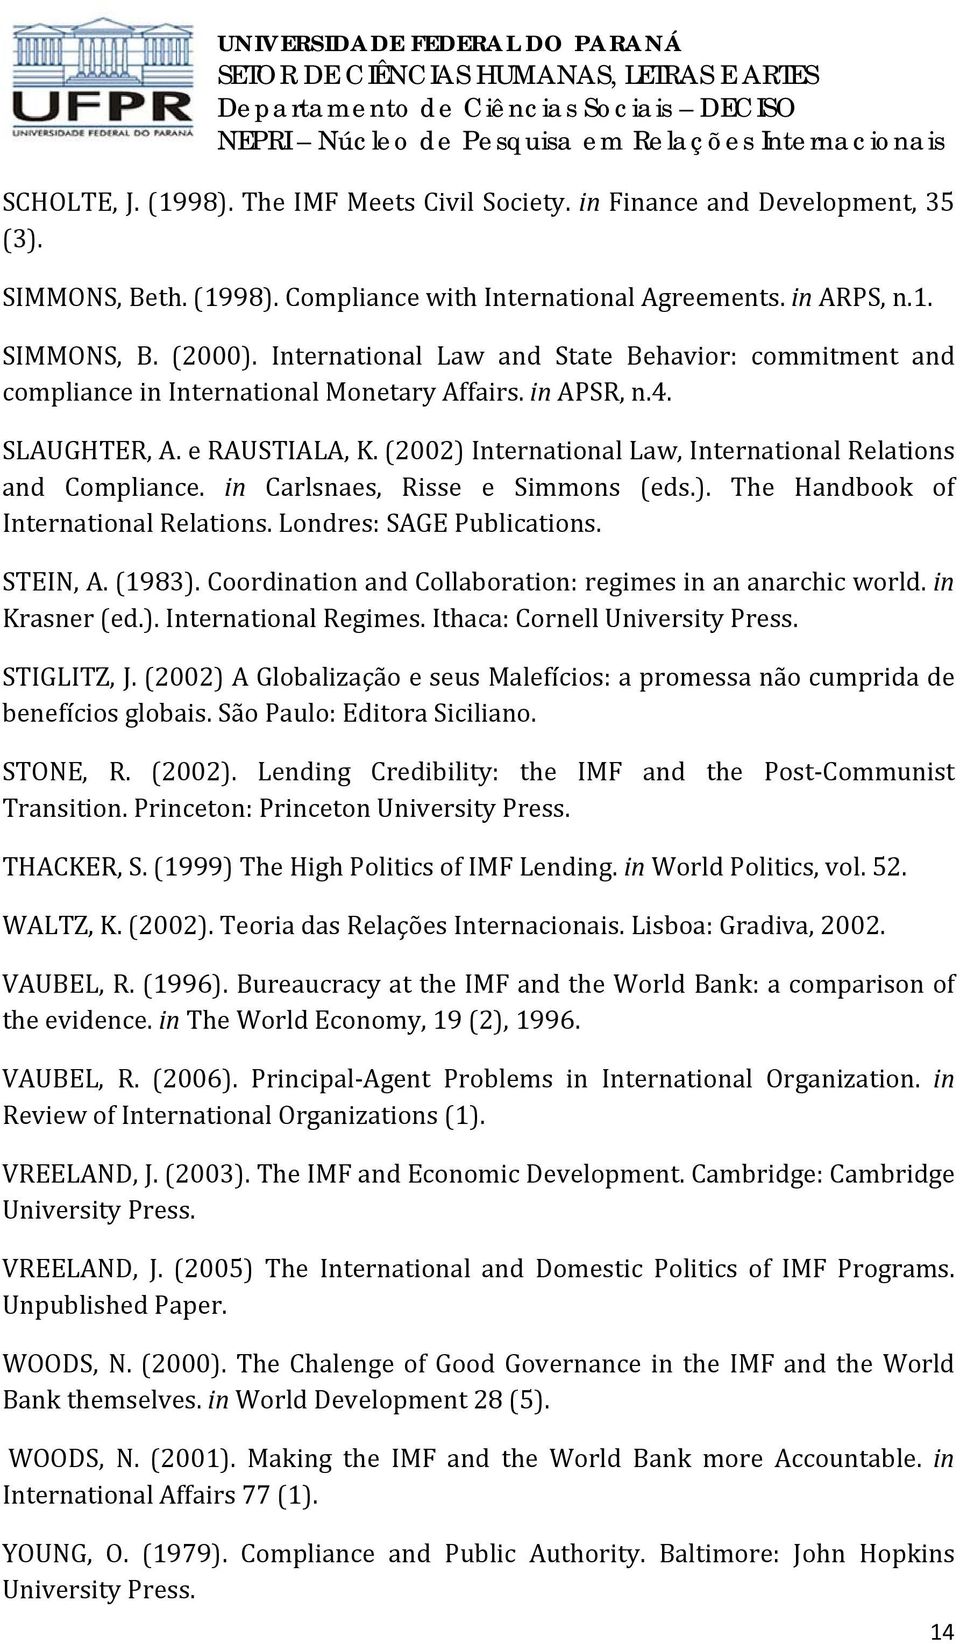 (2002) International Law, International Relations and Compliance. in Carlsnaes, Risse e Simmons (eds.). The Handbook of International Relations. Londres: SAGE Publications. STEIN, A. (1983).